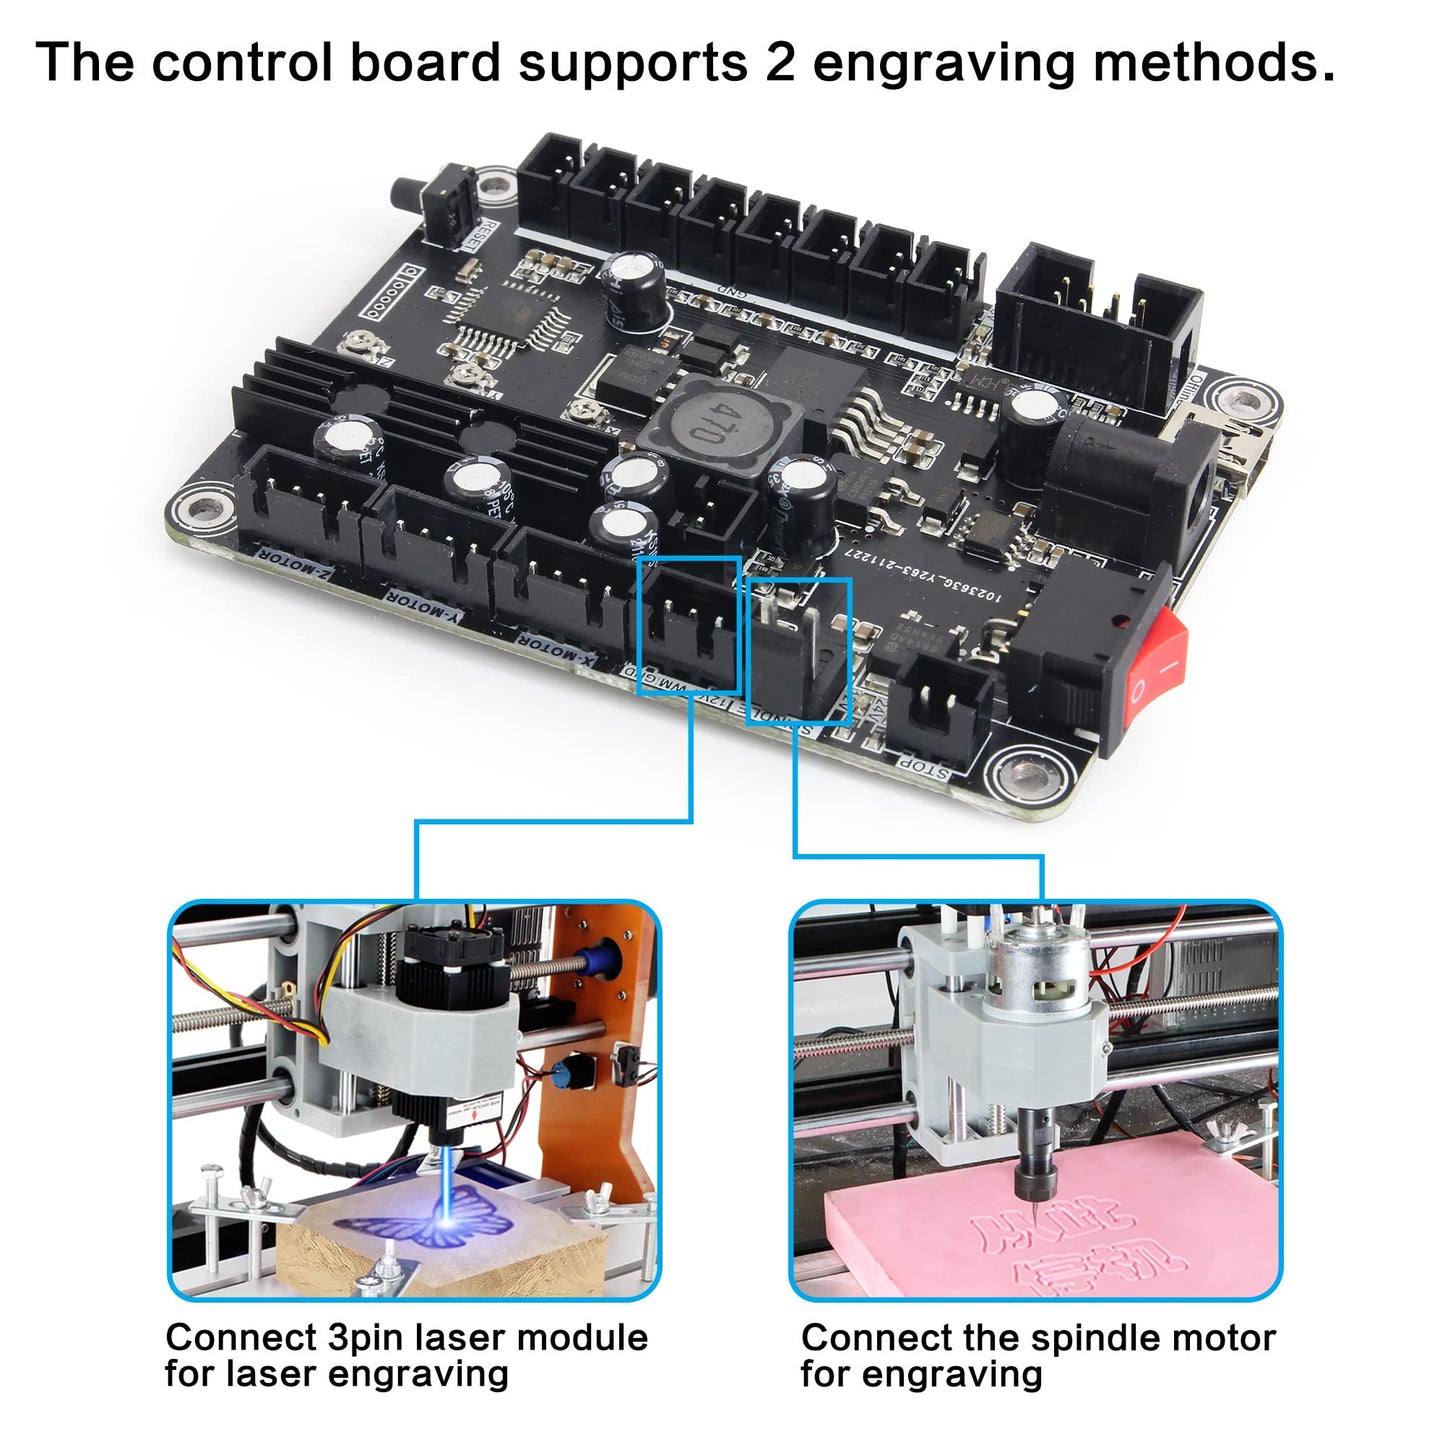 CNCTOPBAOS 3 Axis GRBL Control Board USB Port CNC Router Controller Board grbl 1.1f with GRBL Offline Controller Remote Hand Control for CNC